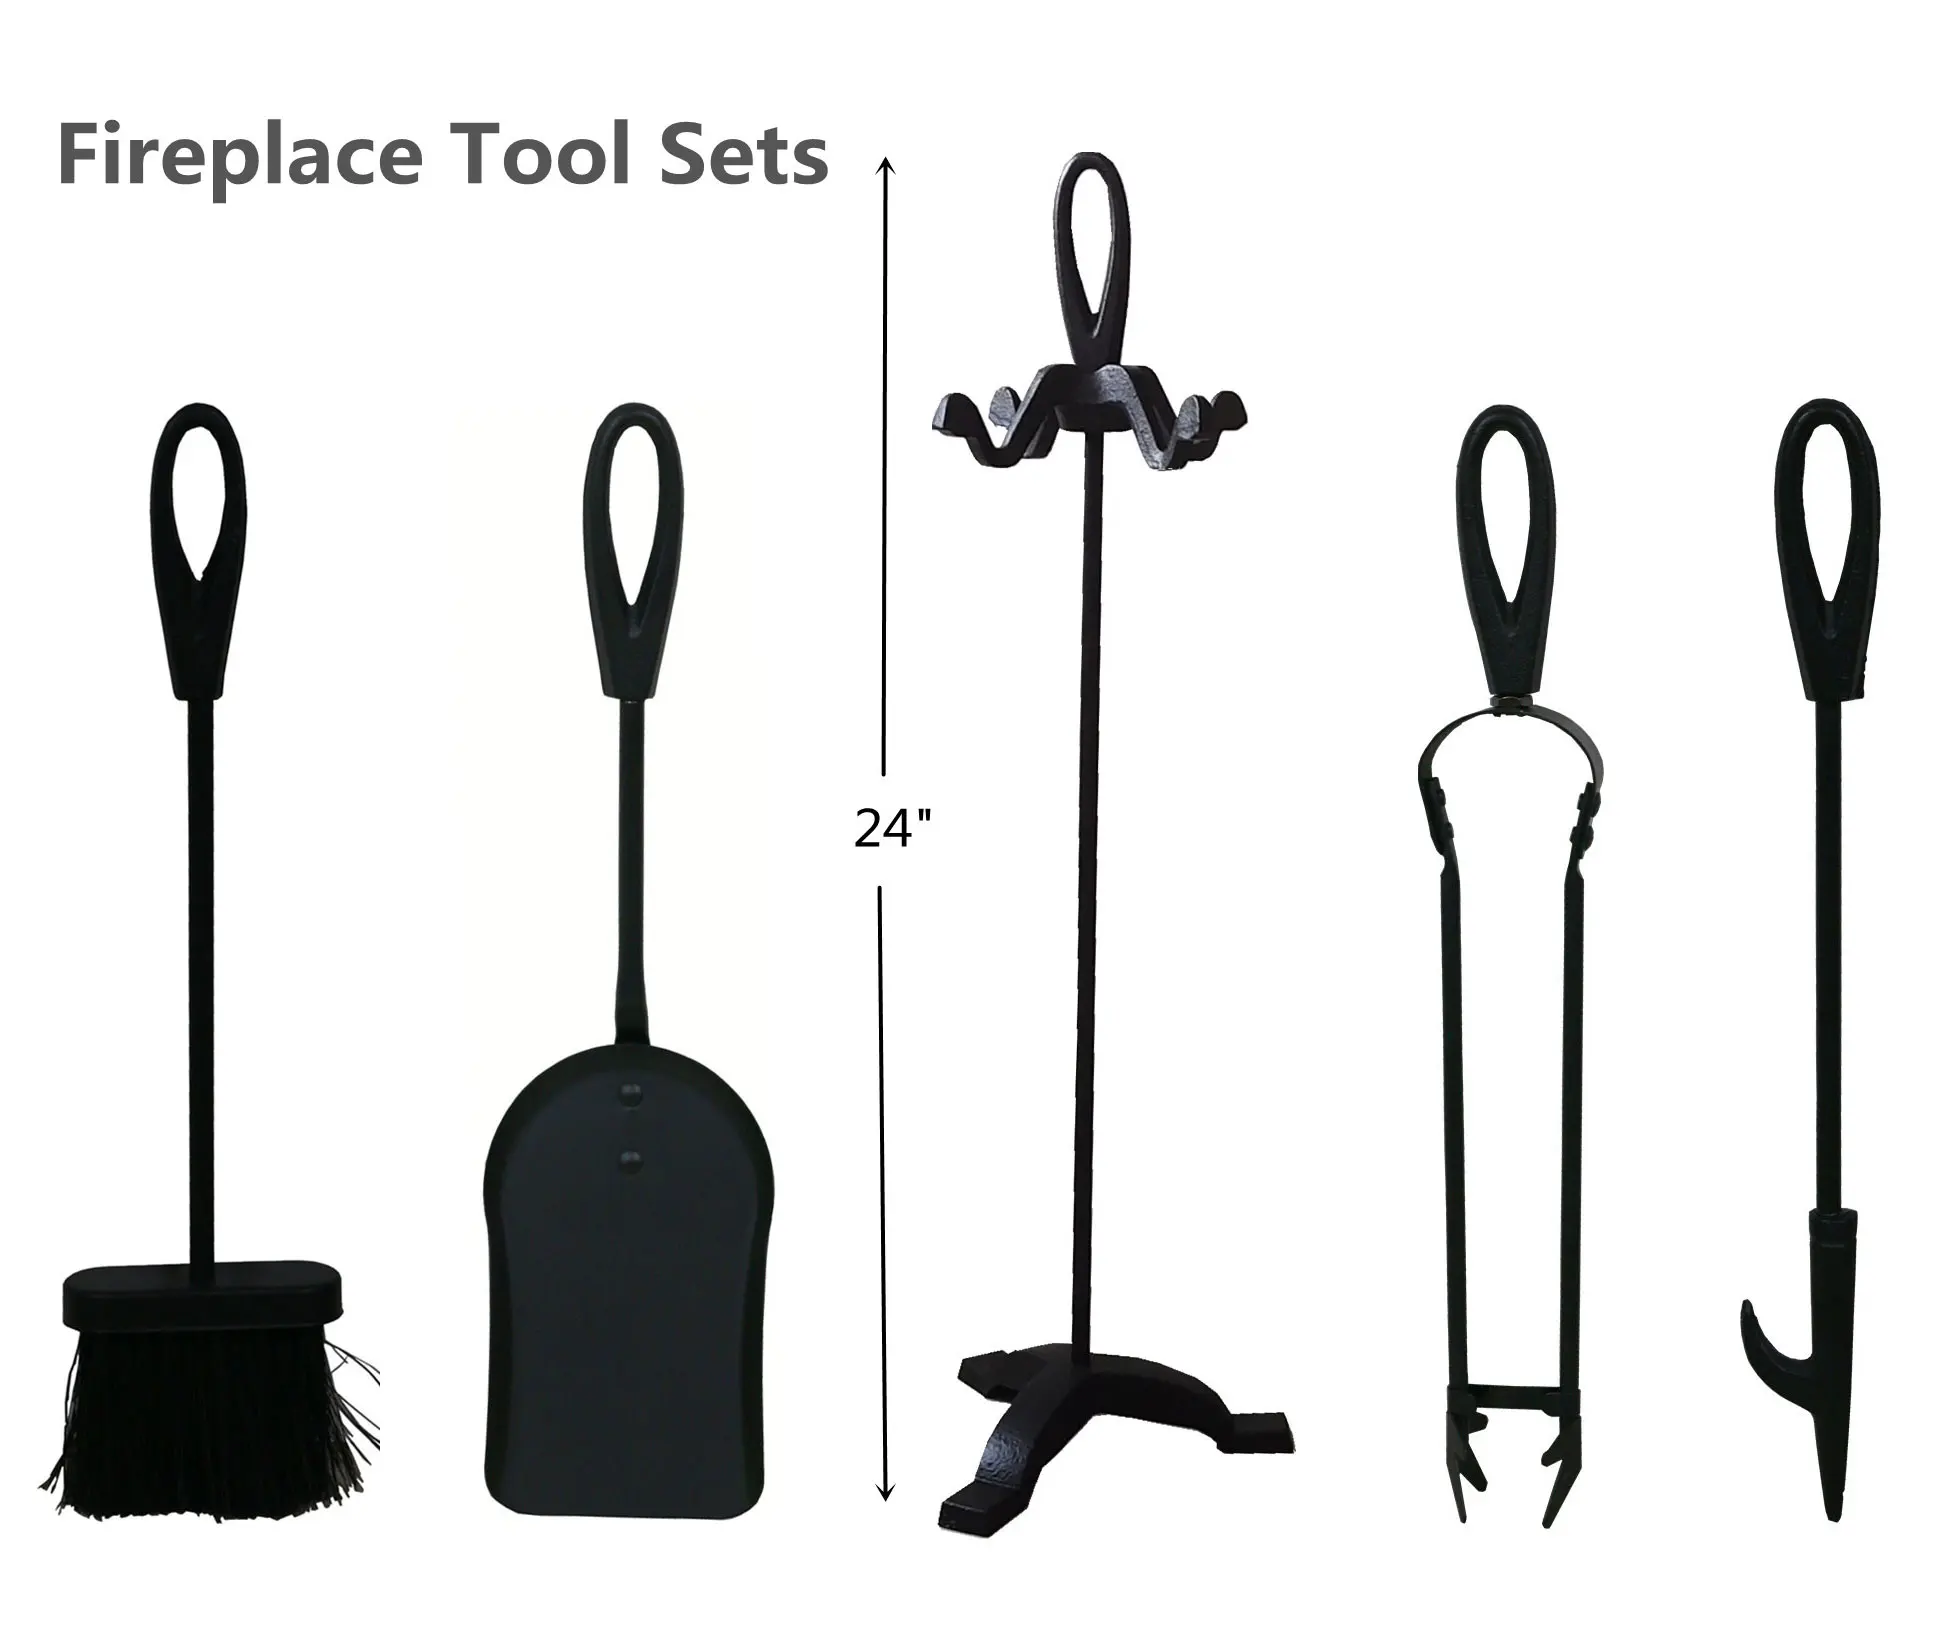 Small Handle Fireplace Tools Sets Accessories For Fireplace/Camping/Picnic